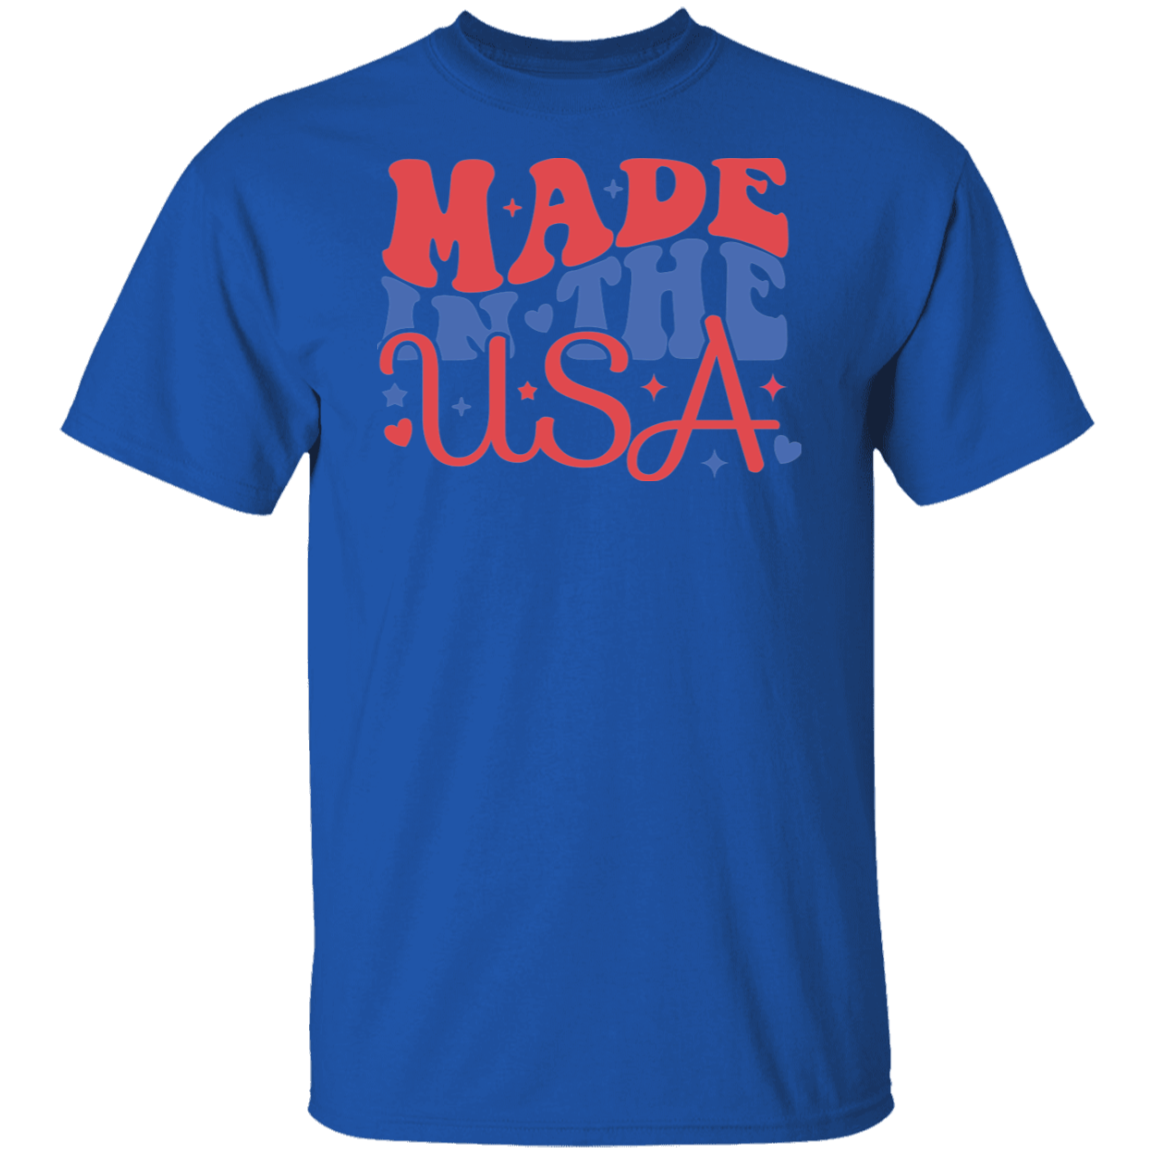 Made in The USA | short sleeve premium T-Shirt